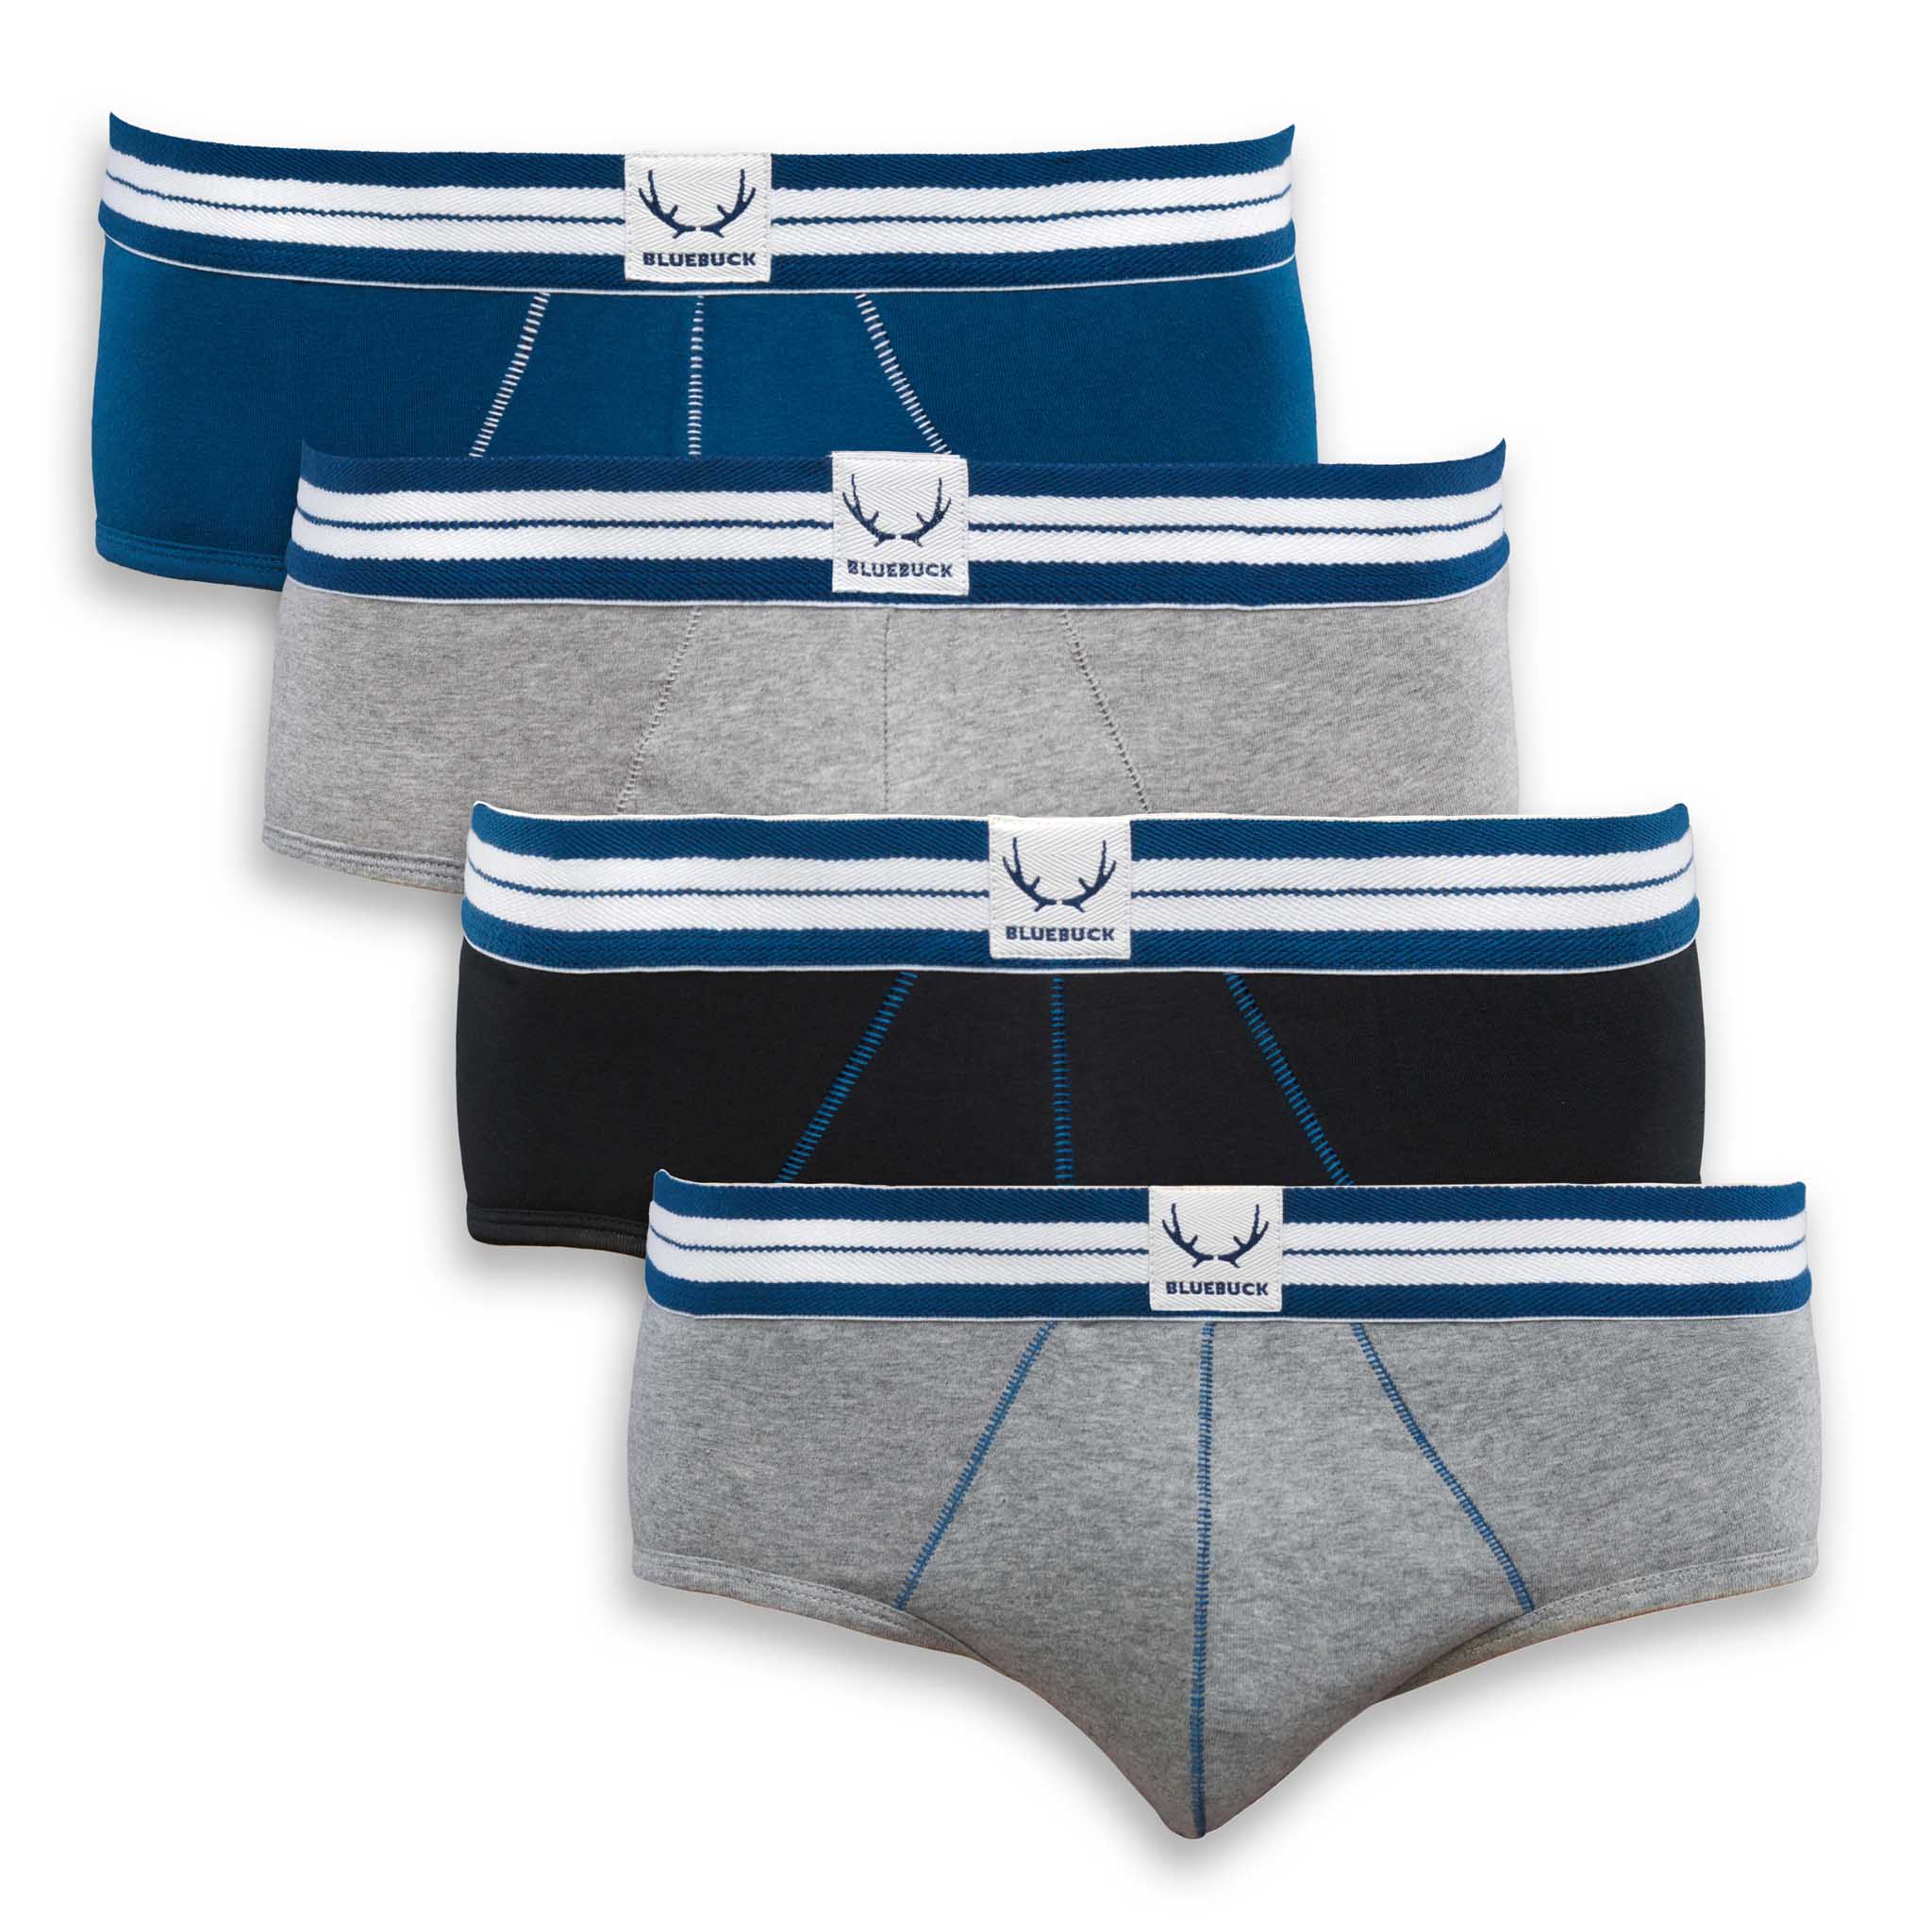 Colorful, classic underwear pack of 4 made from organic cotton from Bluebuck